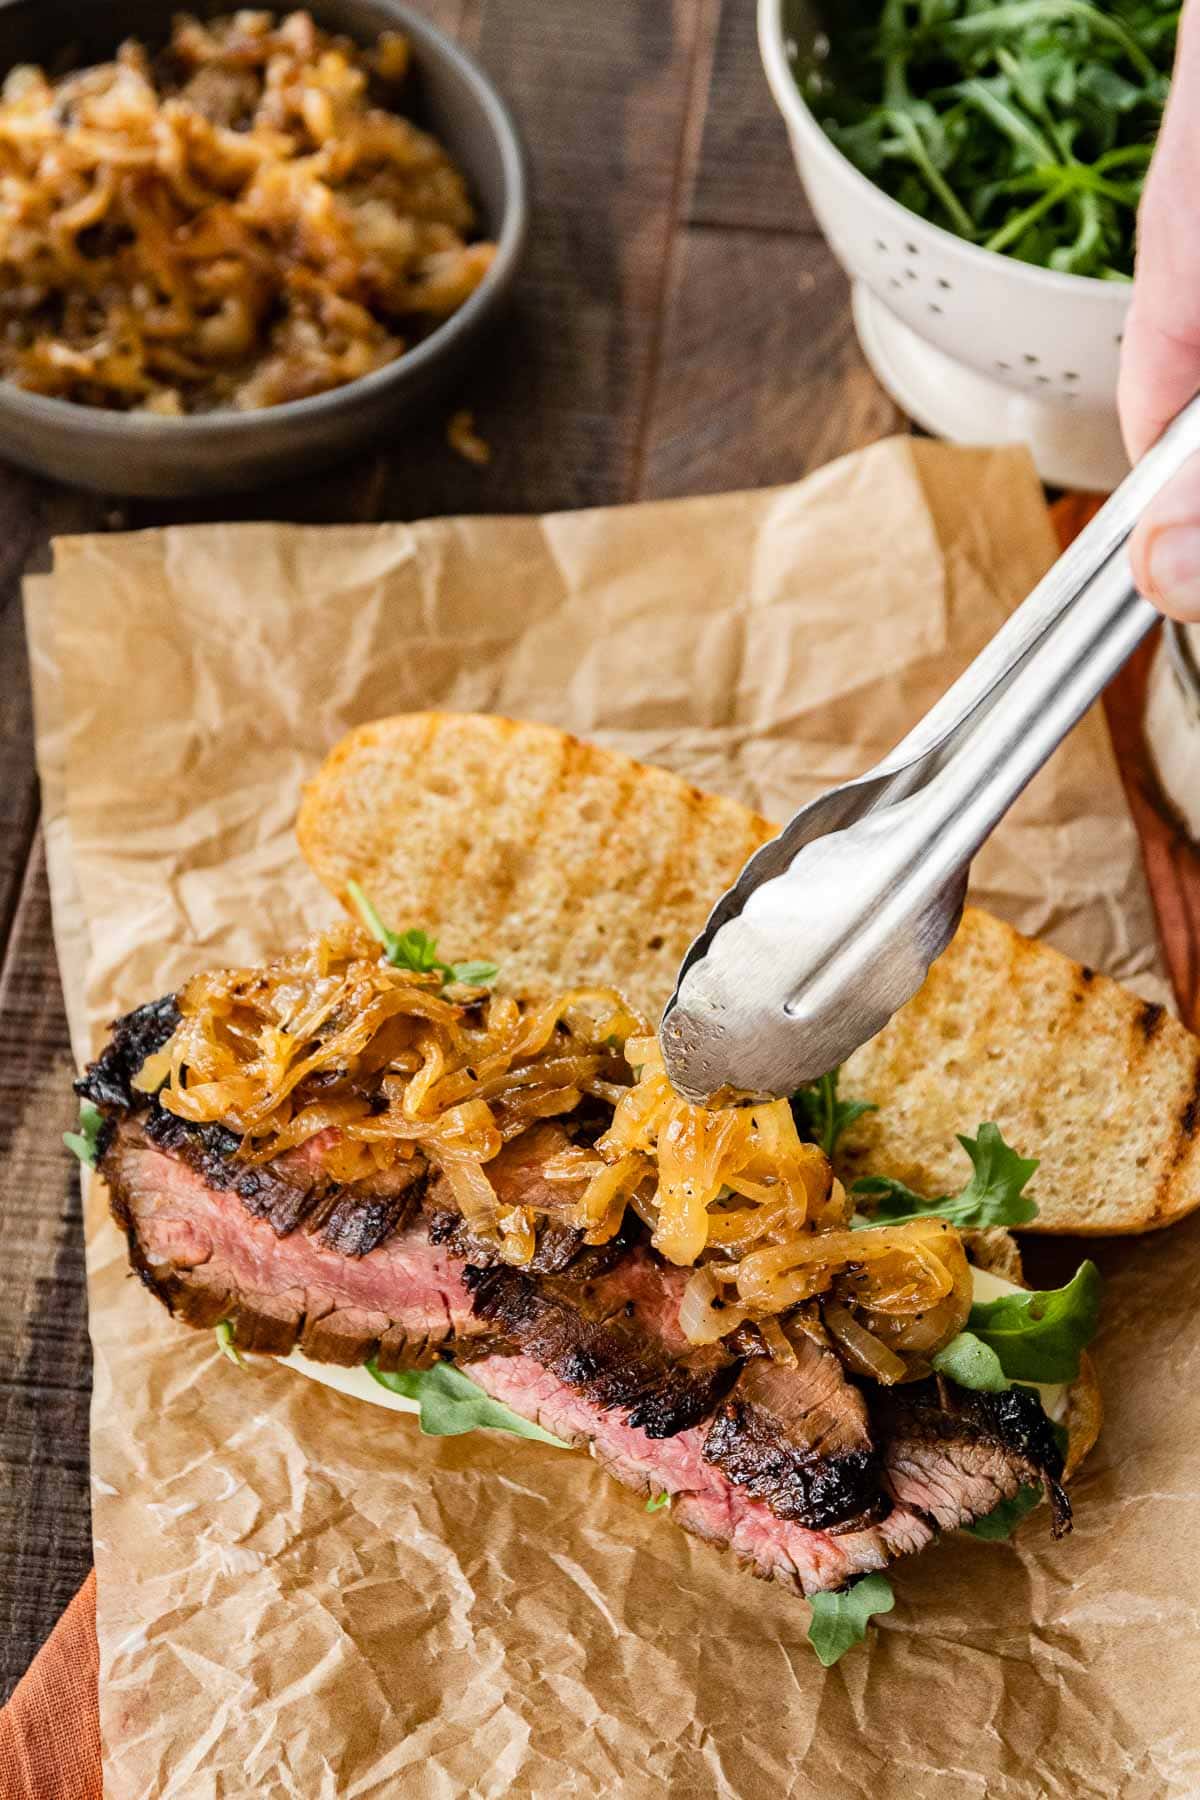 Adding onions to meat for Steak Sandwiches